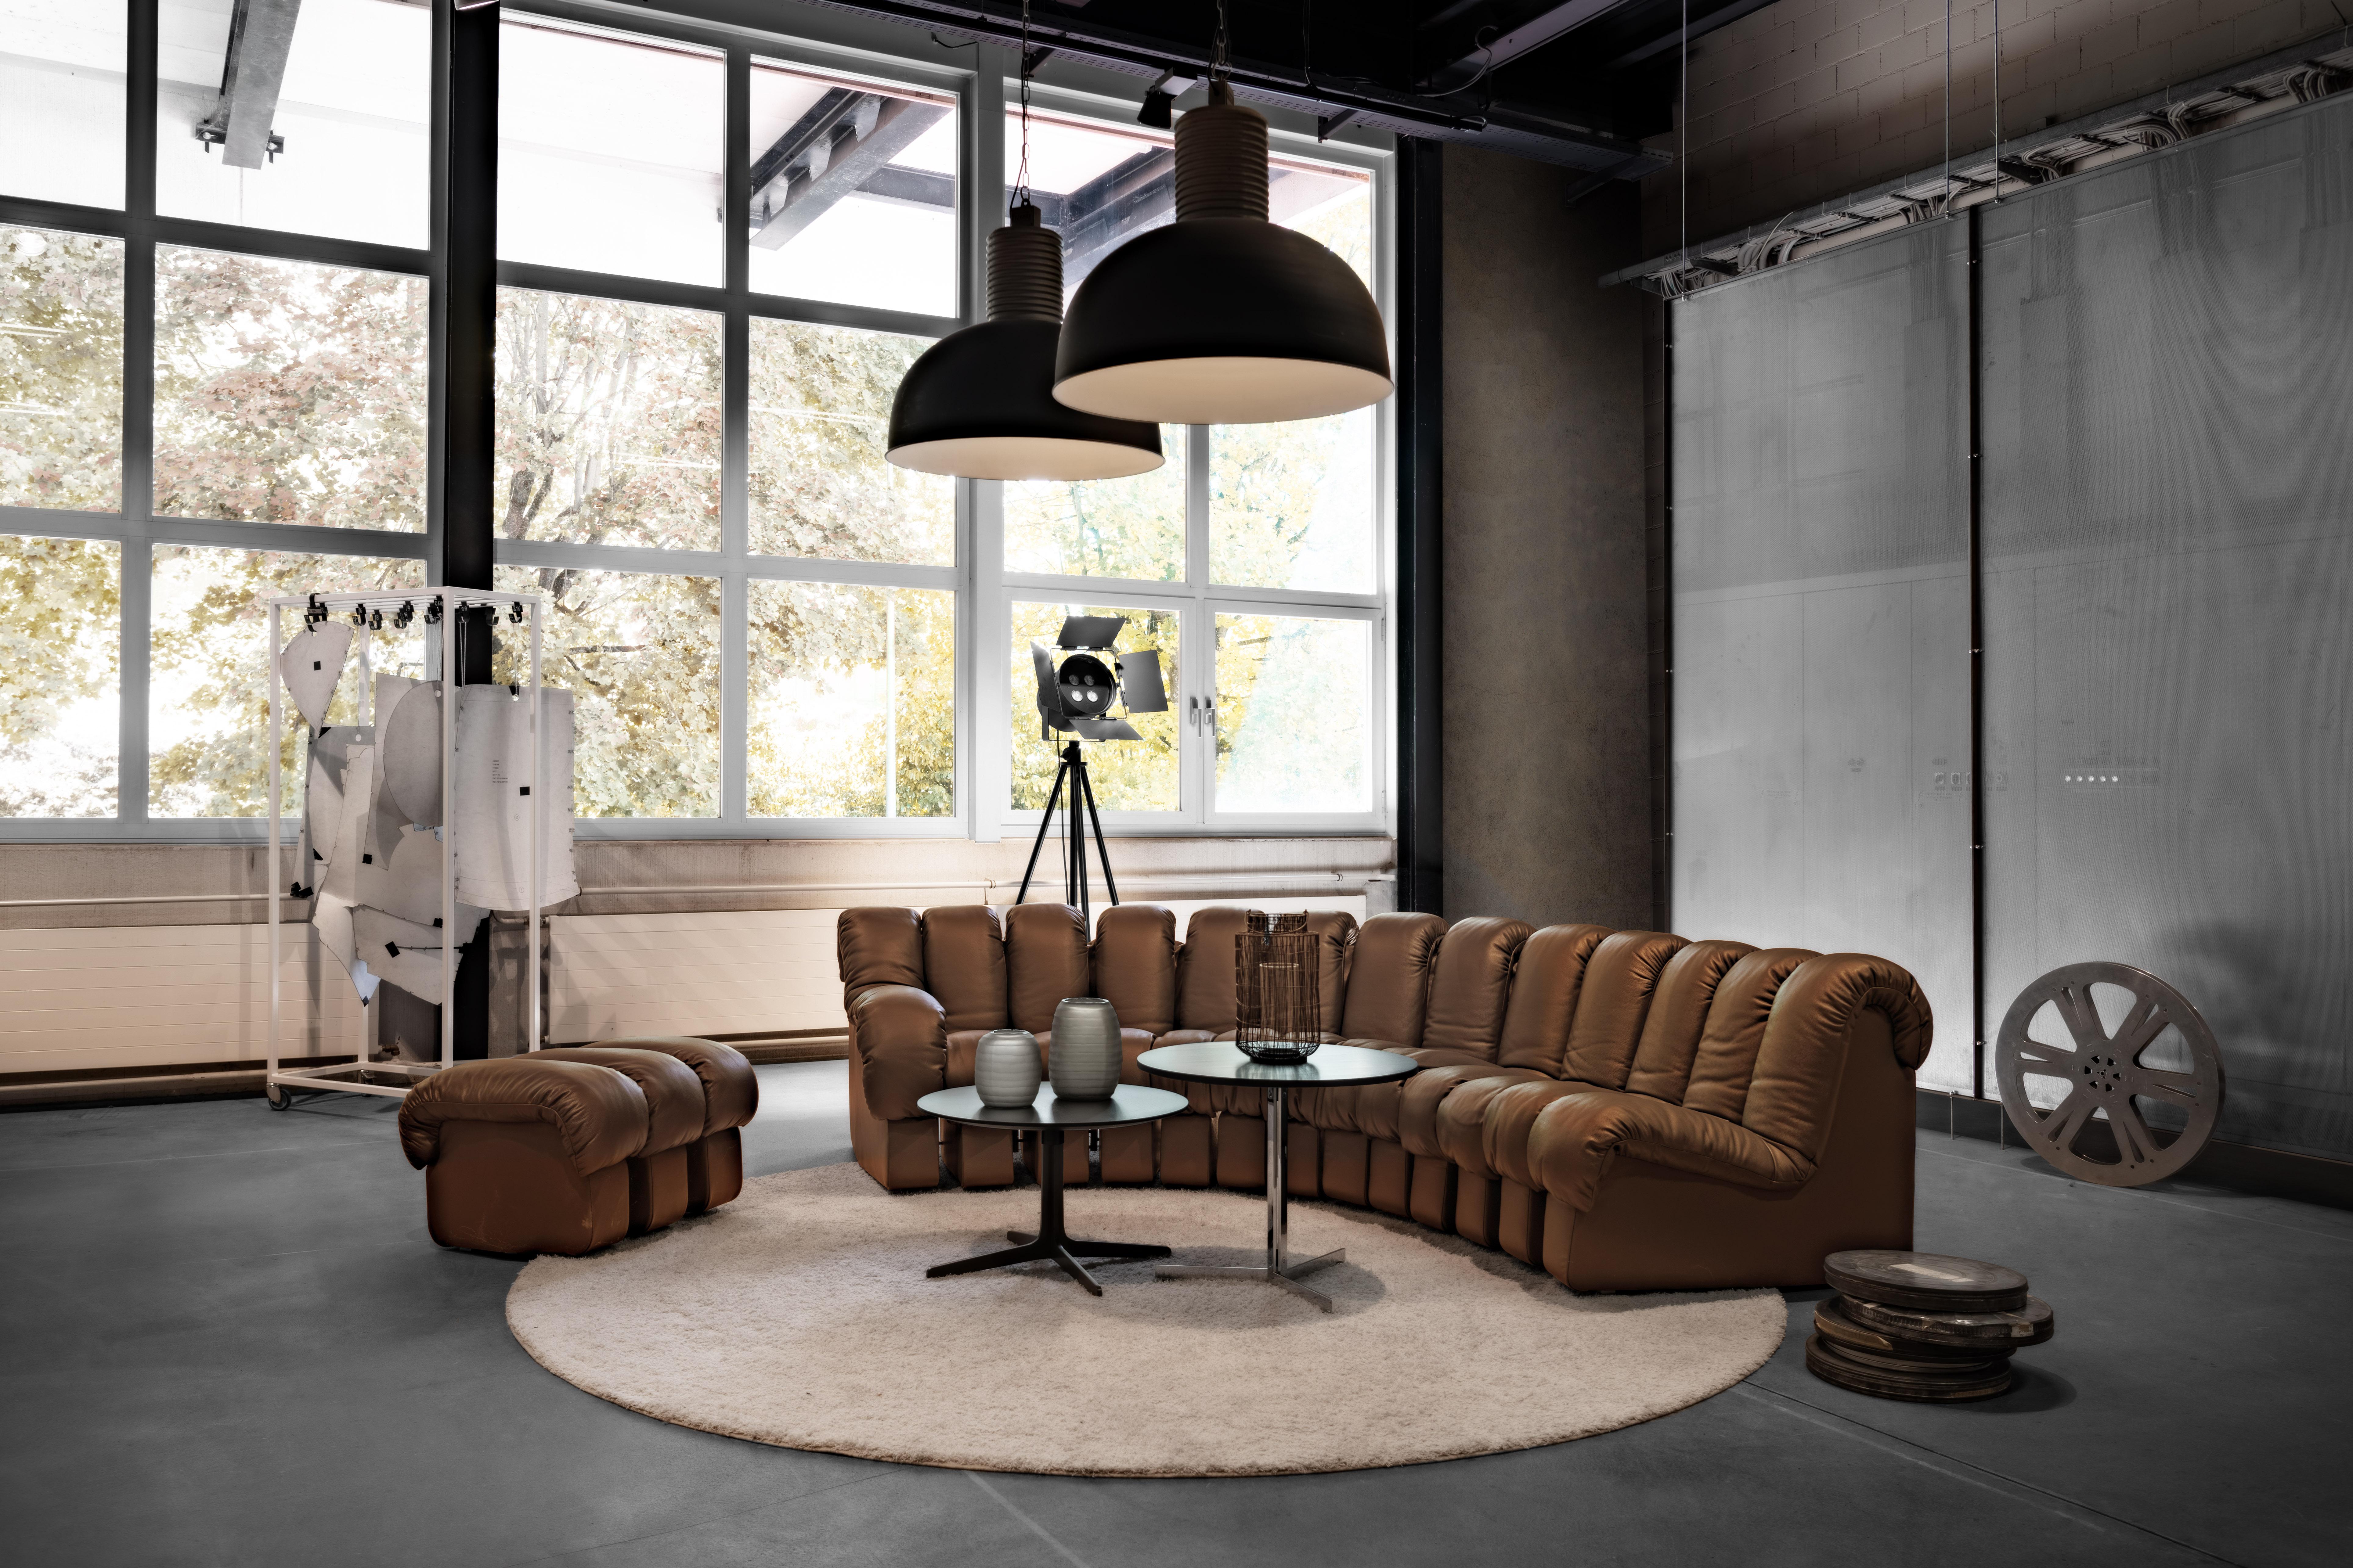 Launched in 1972, DS-600 is an indestructible, variable modular system of upholstered furniture consisting of individual, addable armchair elements. These consist of an L-shaped hard foam core covered with a down-lined and leather-covered cushion.